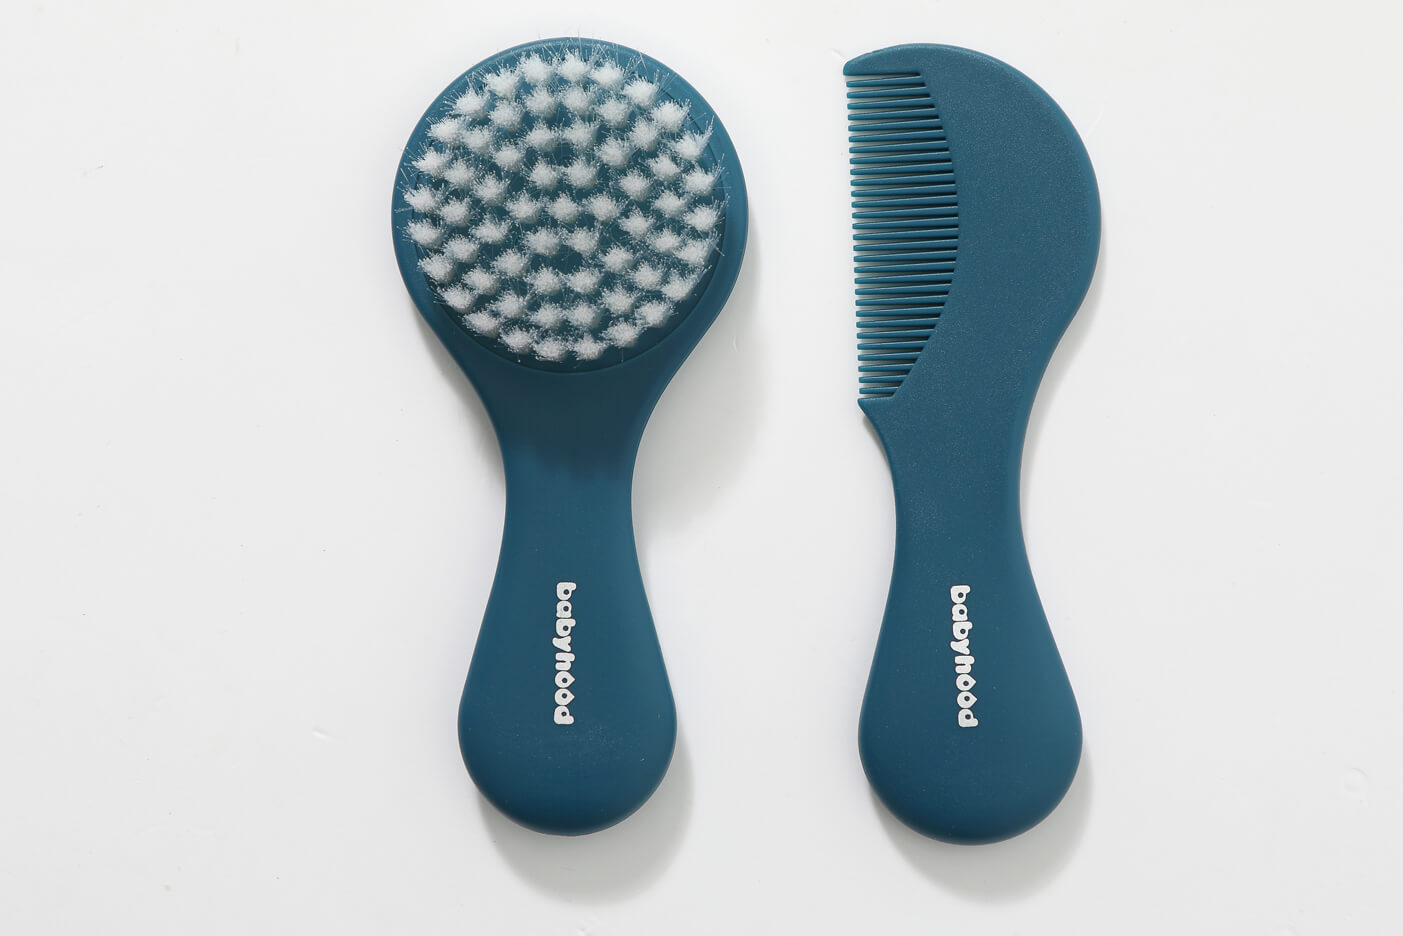 Advantages of Babyhood's Comb and Brush